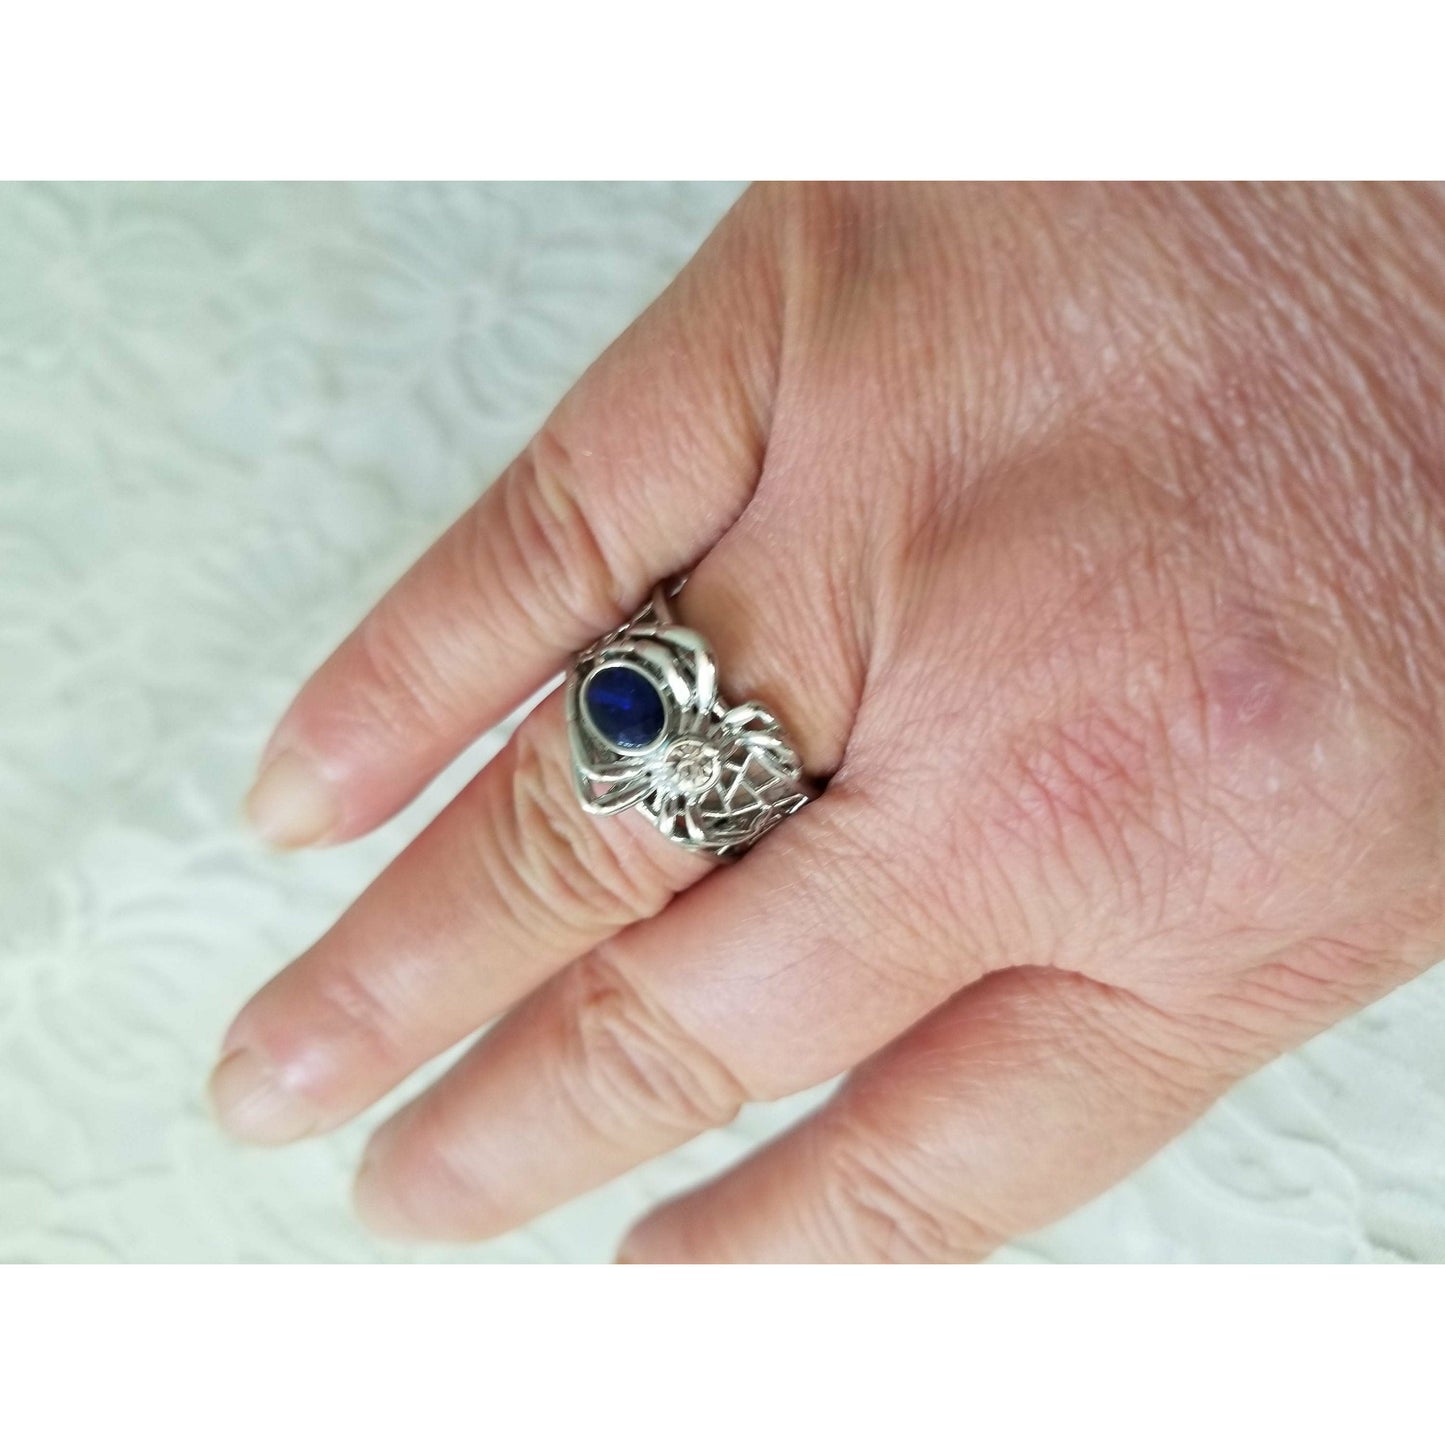 Goddess Athena Enchanted Spider Ring ~ 1.68 Ct Sapphire ~ New Magick 2/19/19 ~ Athena, the Spinner of Fate, Creatrix of Destiny ALMOST GONE! 